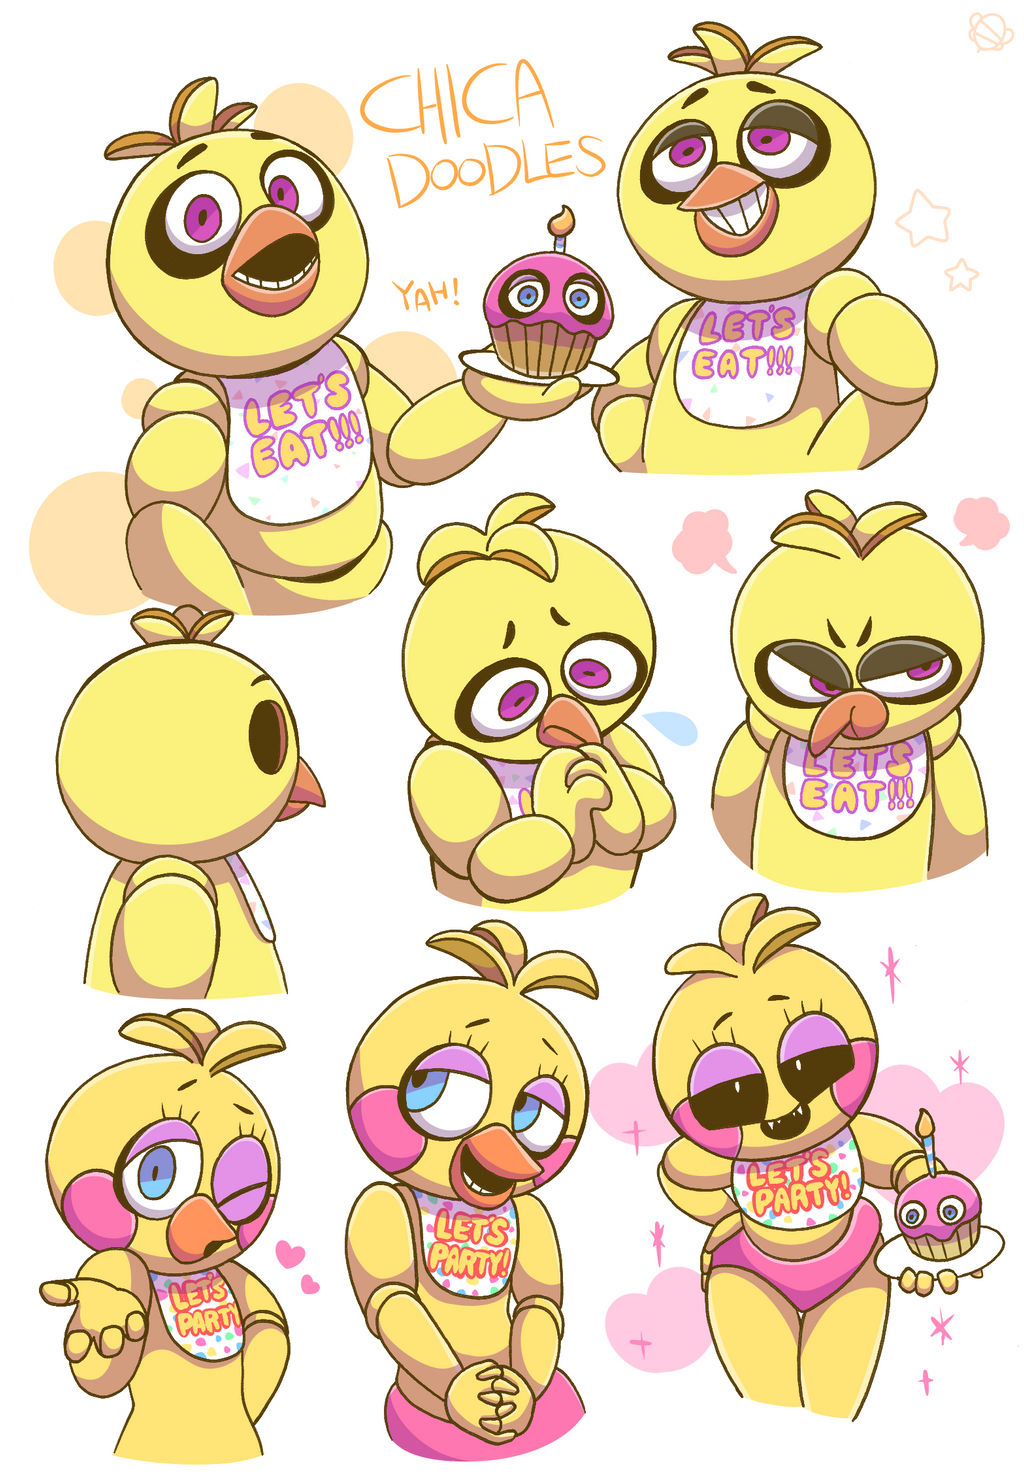 Chica Doodles